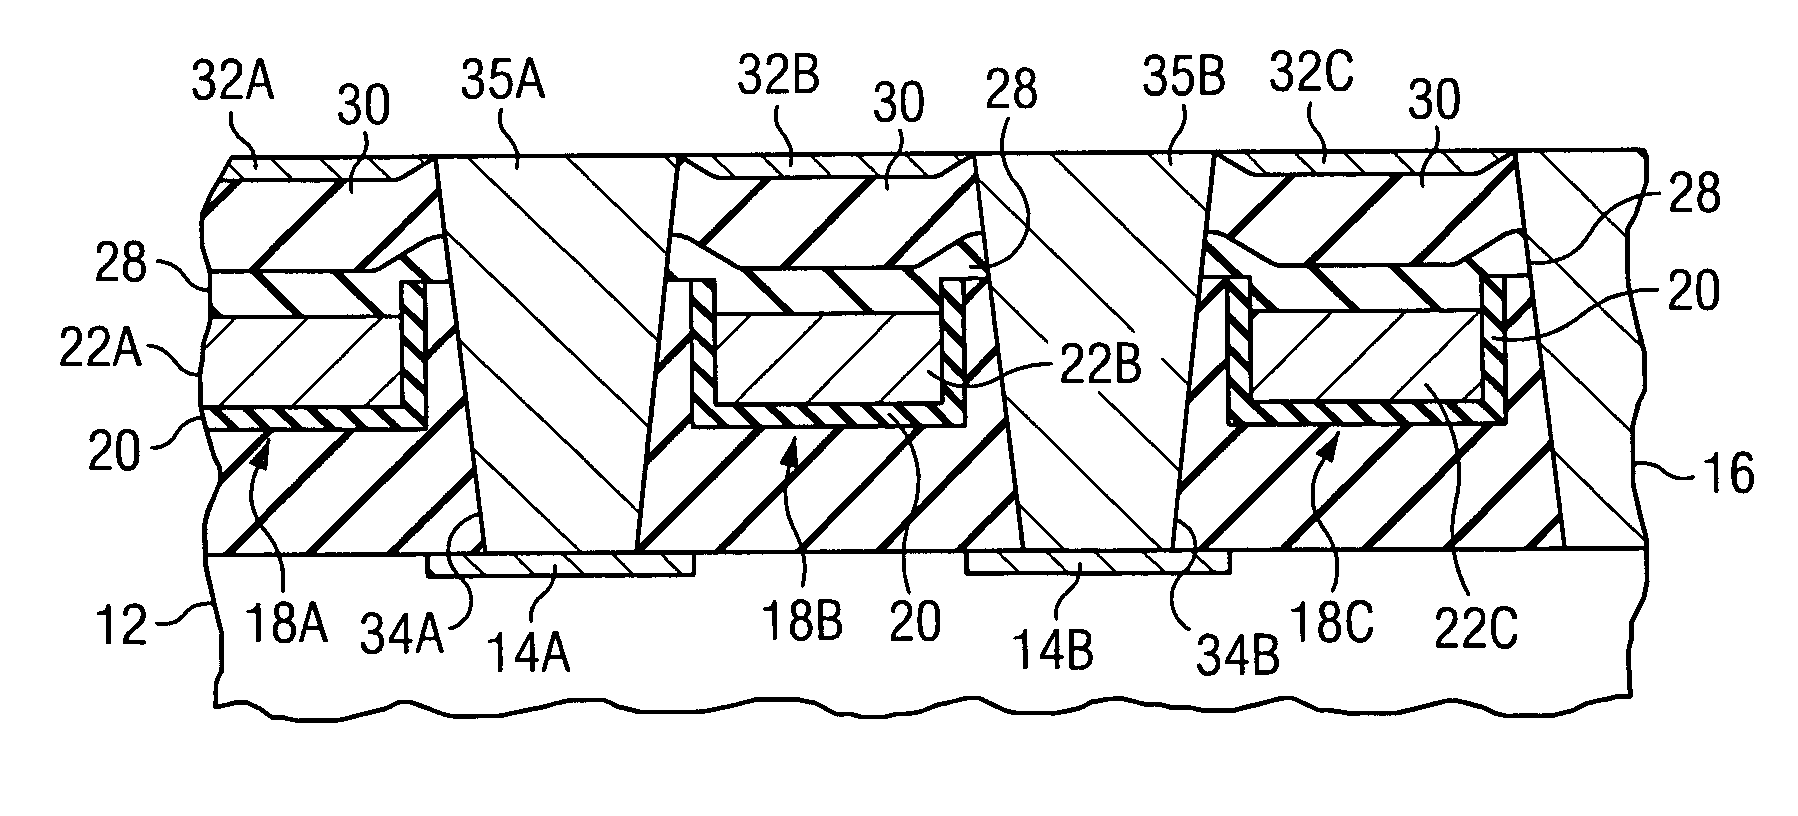 Self-aligned mask to reduce cell layout area